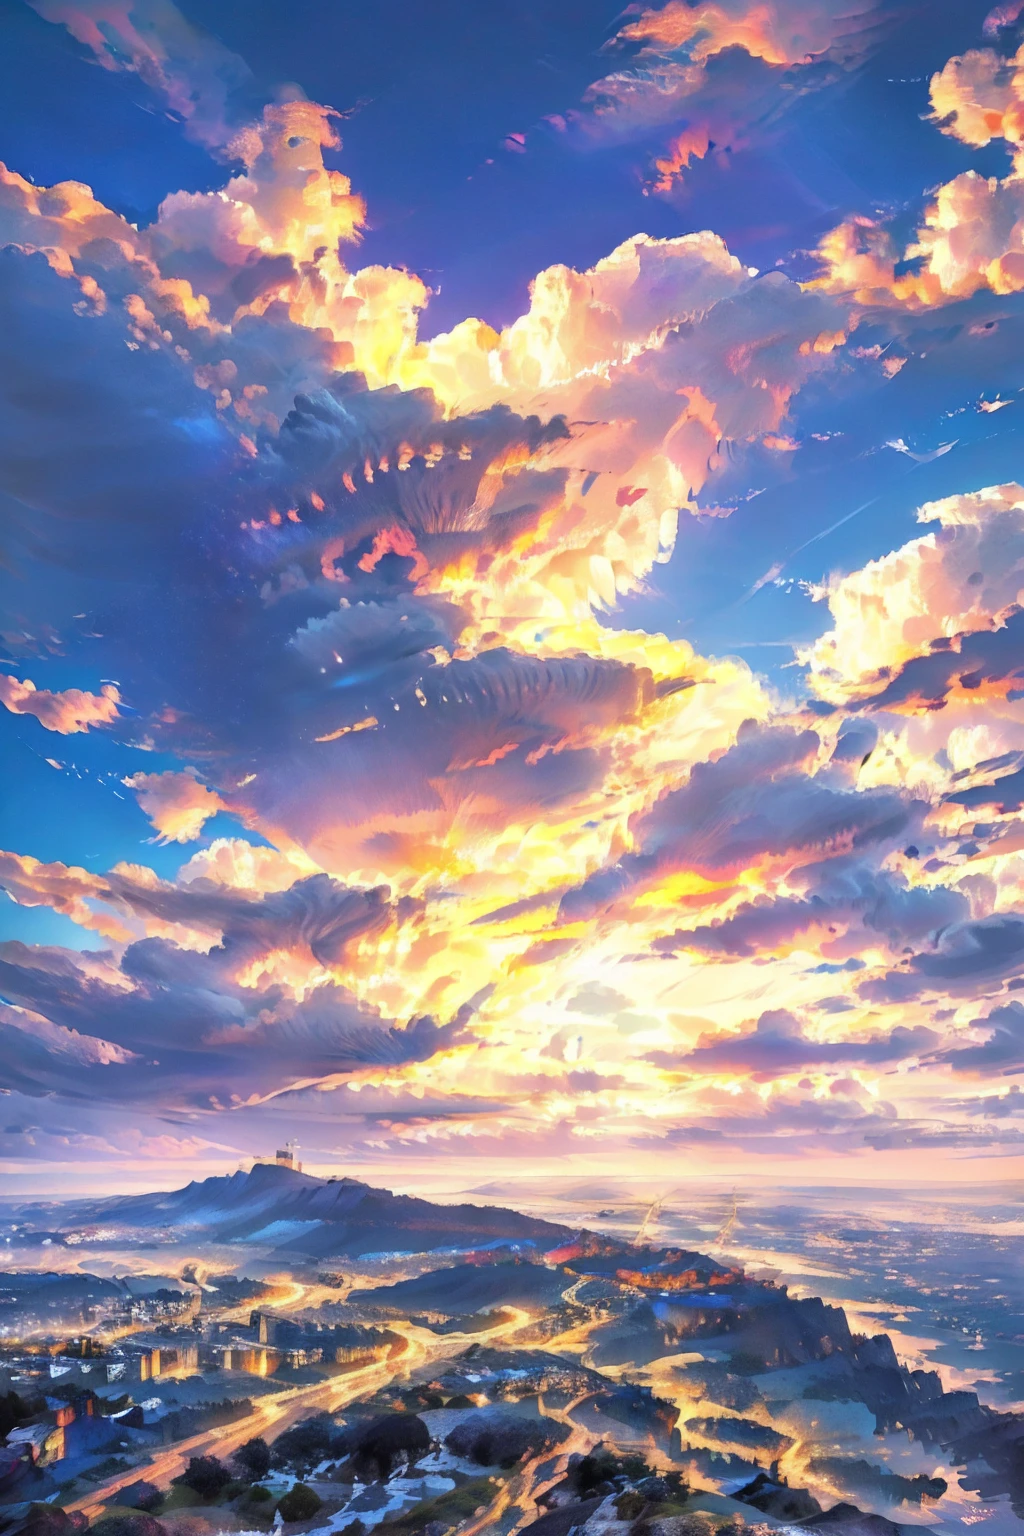 A stunning fantasy landscape with a person standing on a cliff overlooking a colorful, vibrant sunset over a mountainous town below. Detailed, cinematic, dramatic lighting, glowing sky, fantasy elements, photorealistic, 8K resolution.